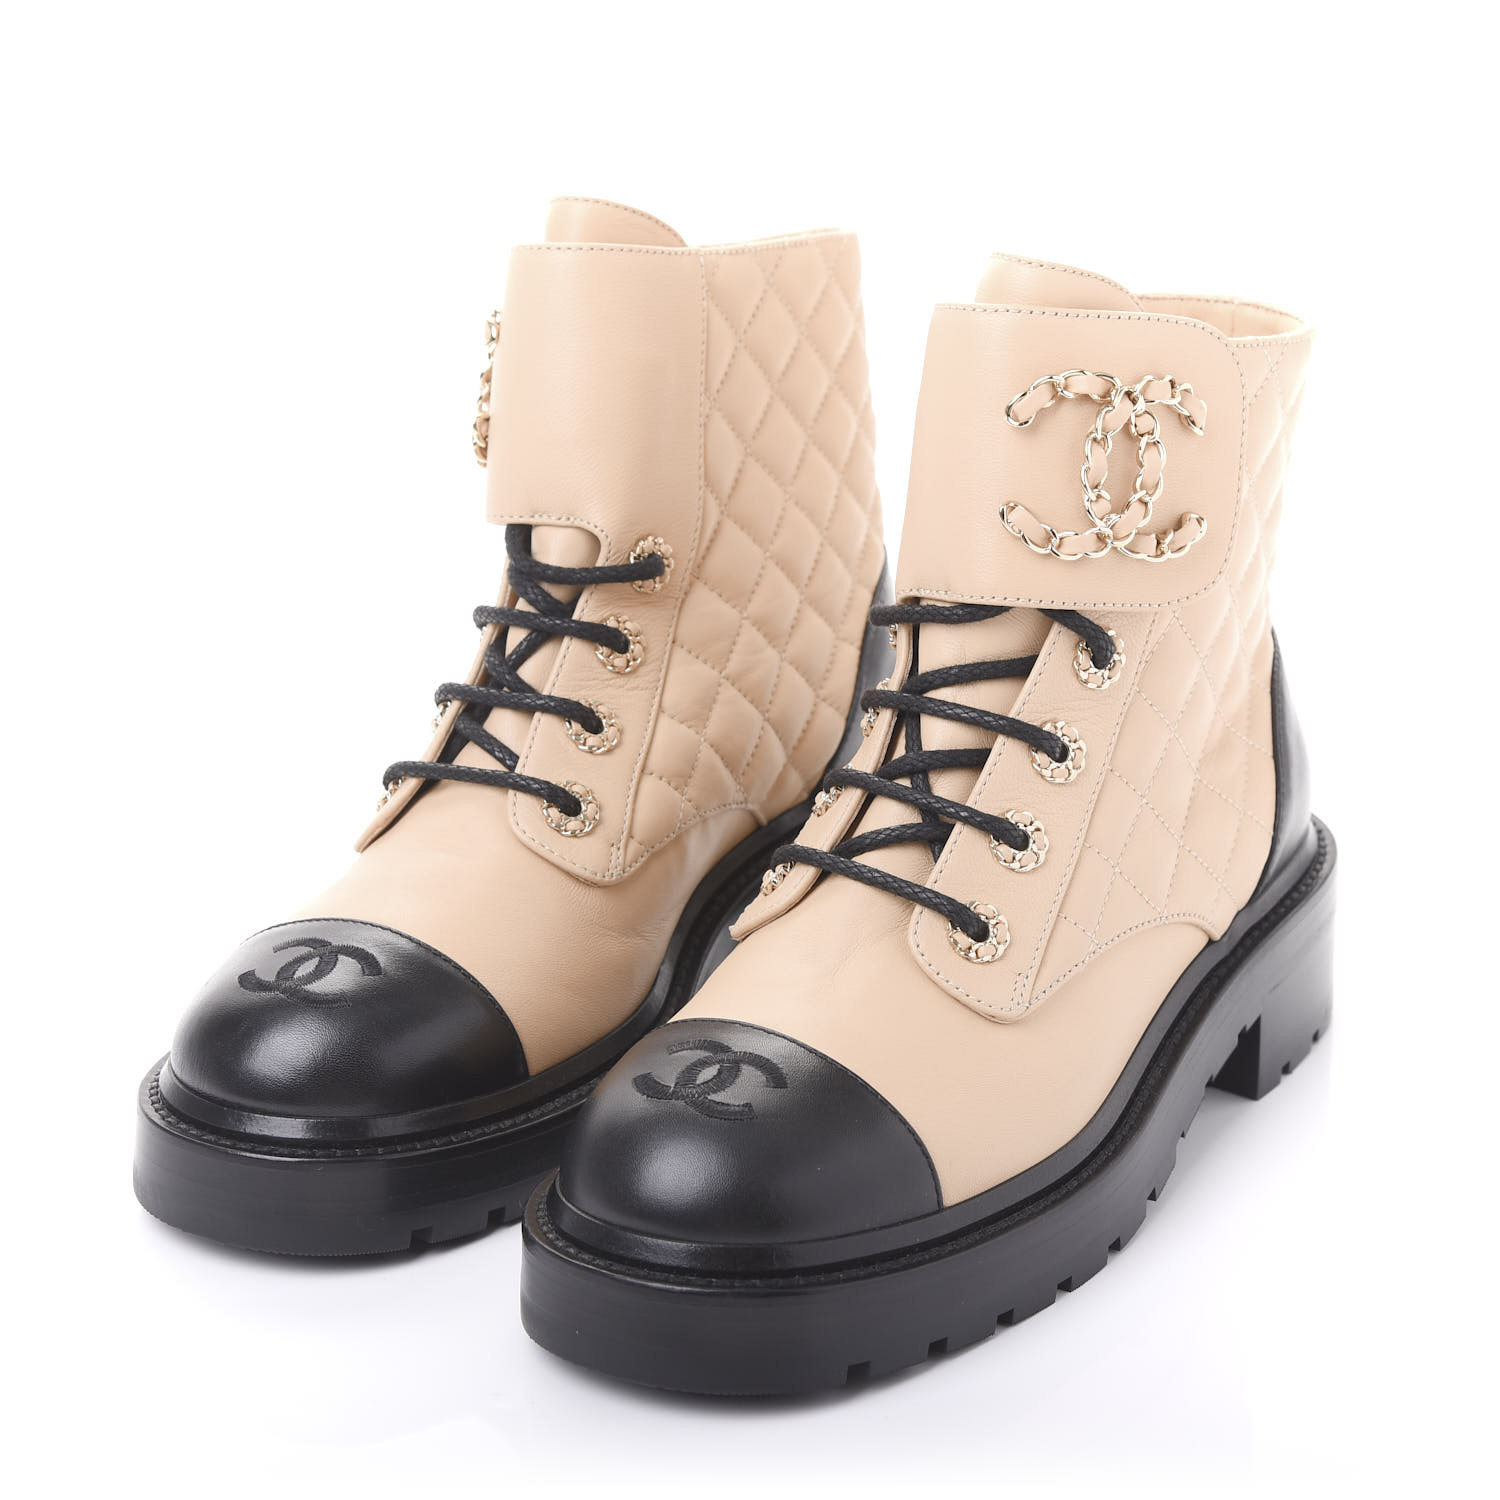 CHANEL Calfskin Quilted Lace Up Combat Boots 36.5 Beige Black 597888 ...